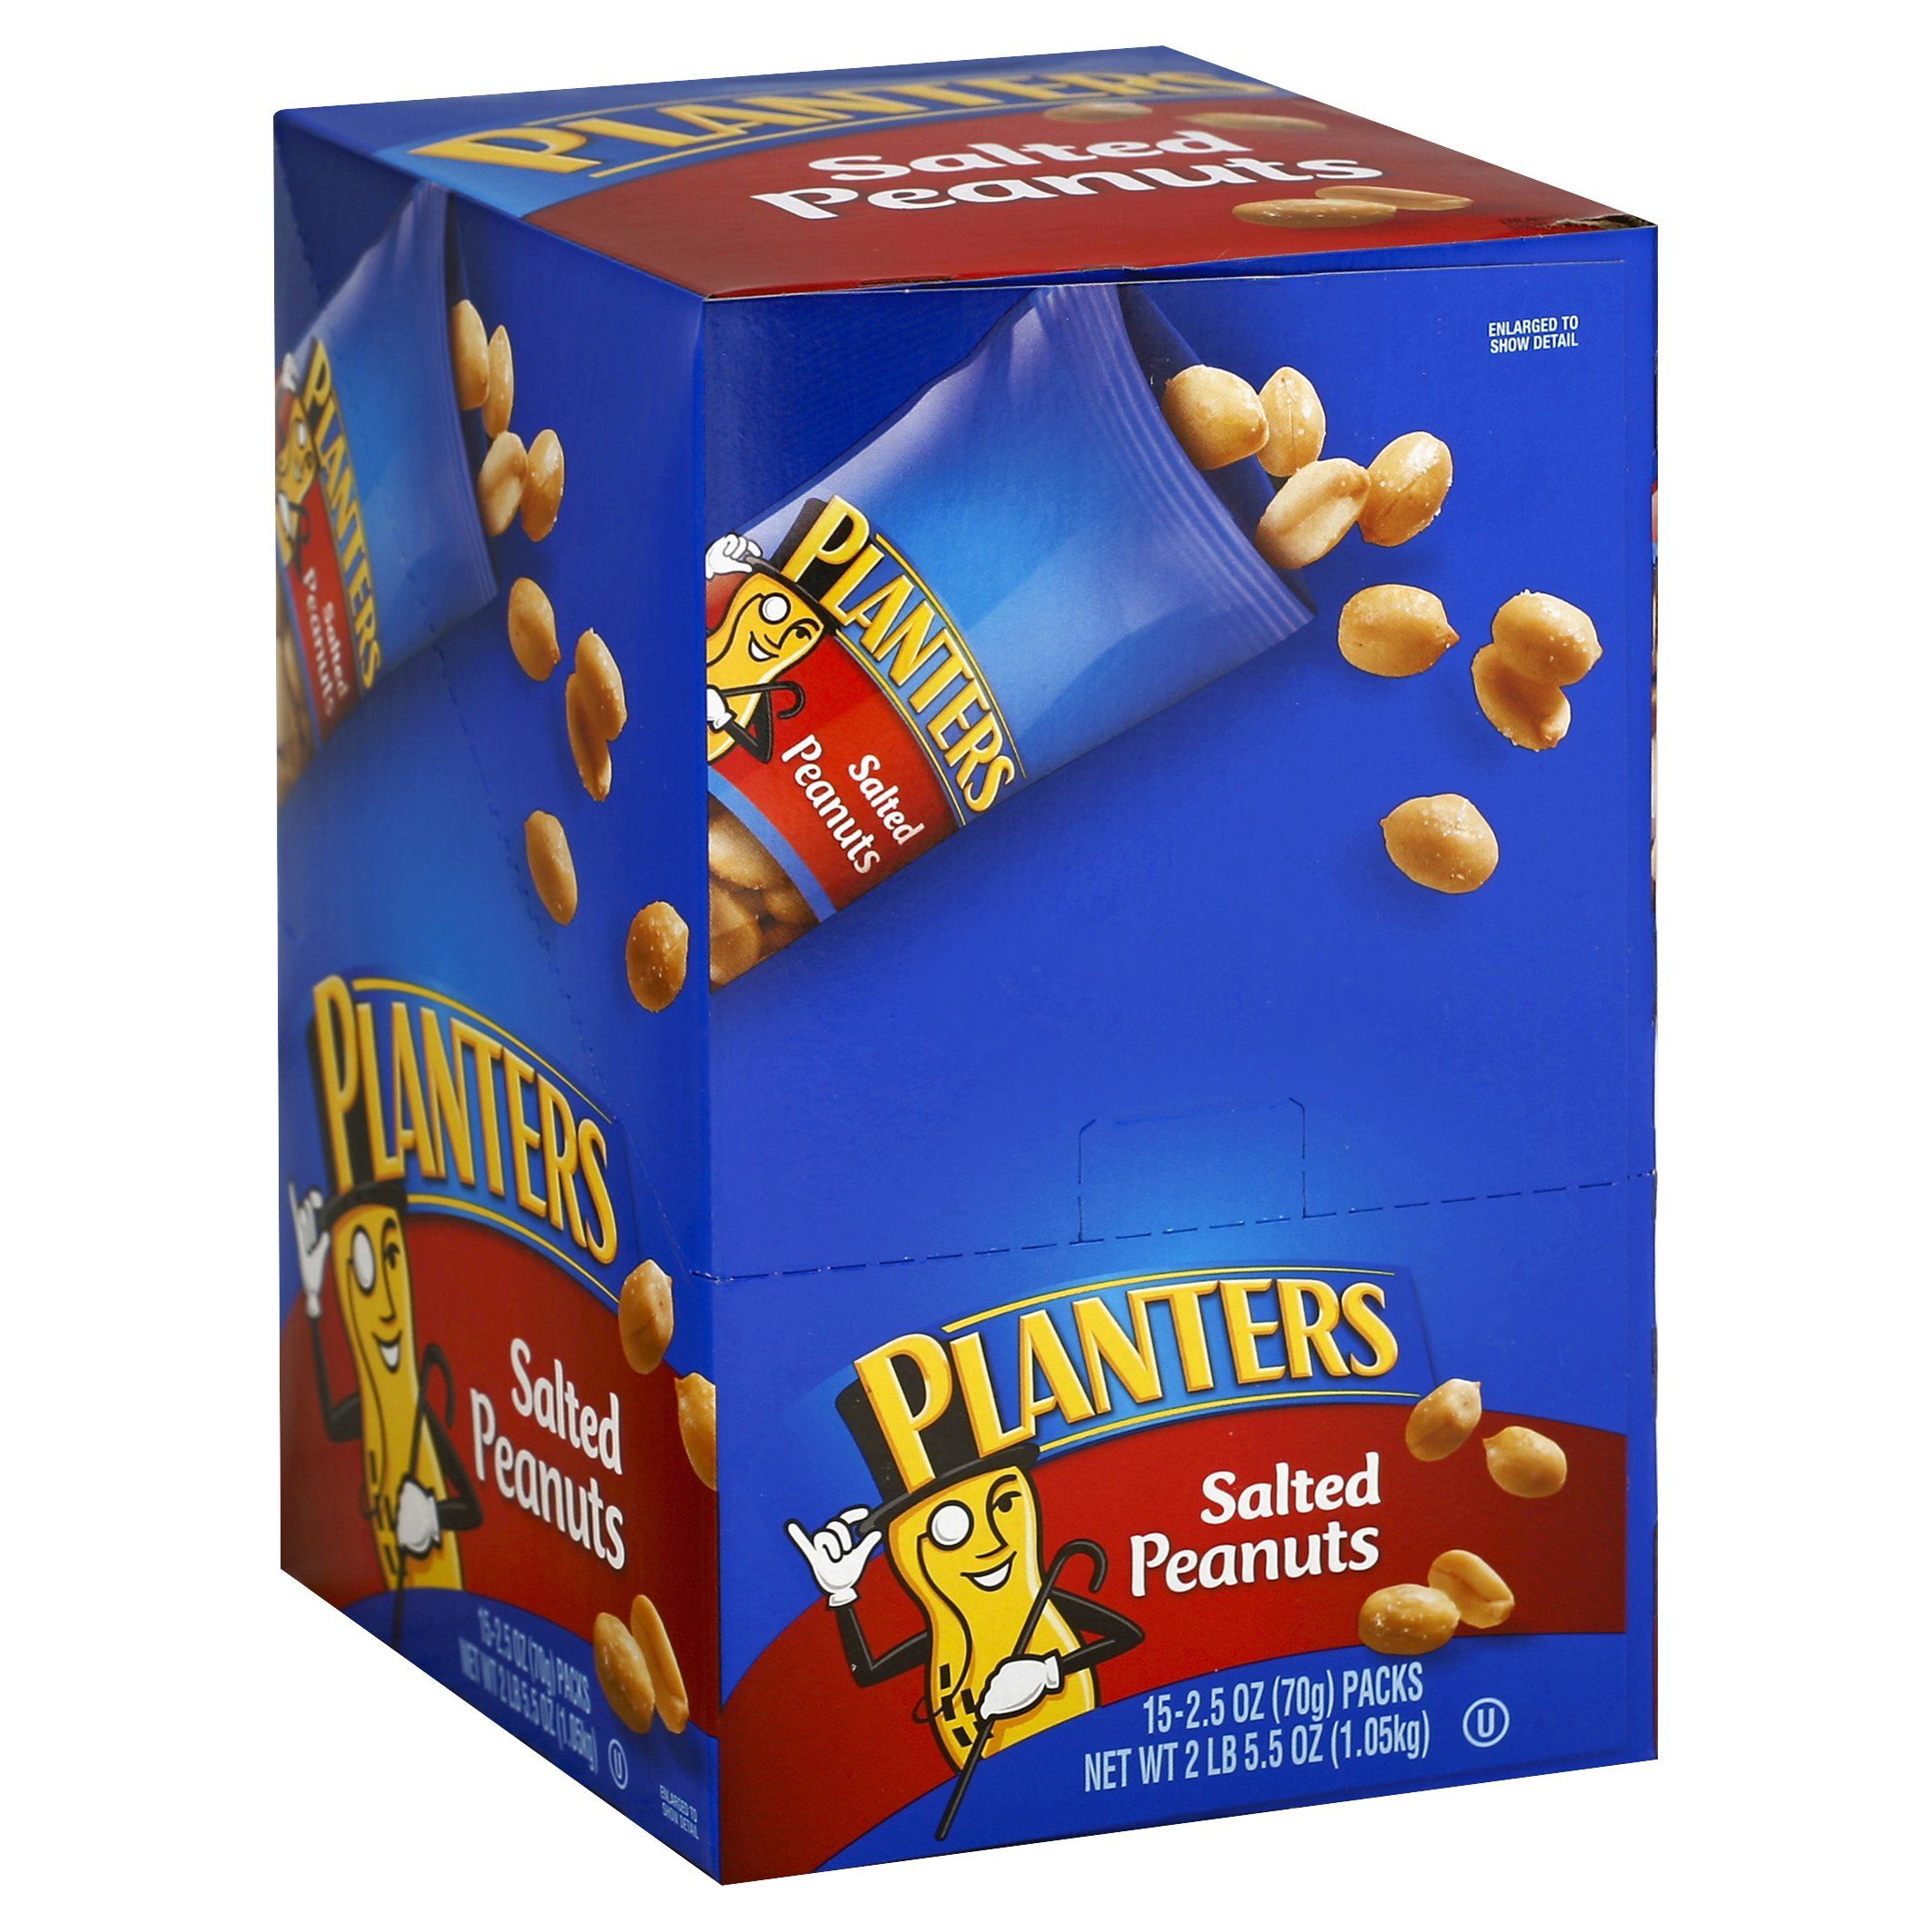 Planters Peanuts Planters Salted 2.5 Oz-15 Count 